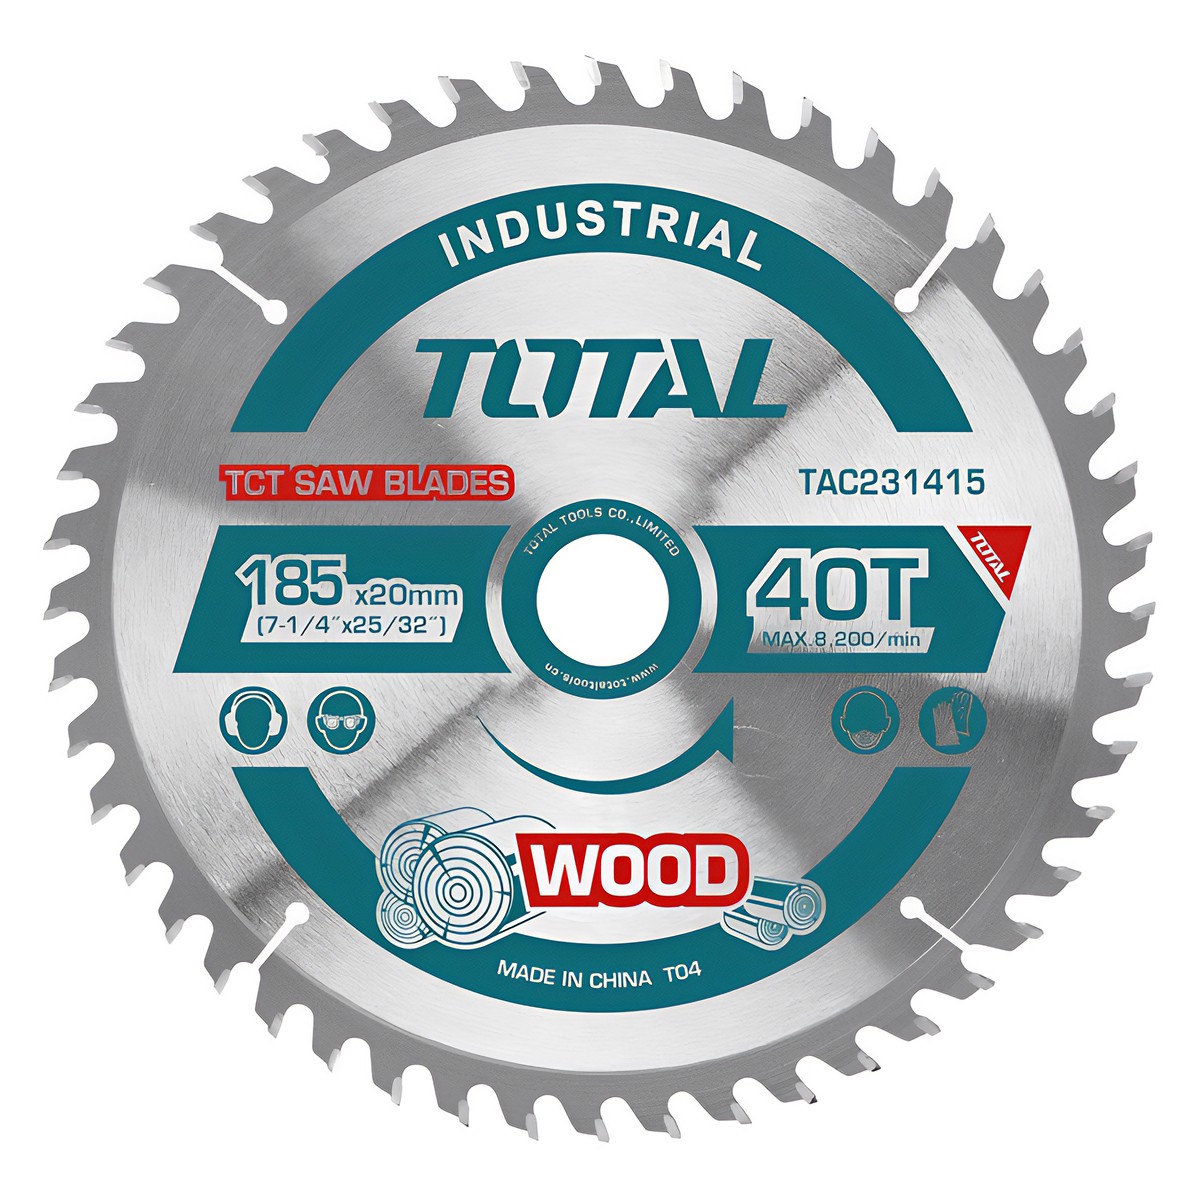 TOTAL TCT SAW BLADE 235MM X 30-24.4MM FOR (TOT-TAC231415)